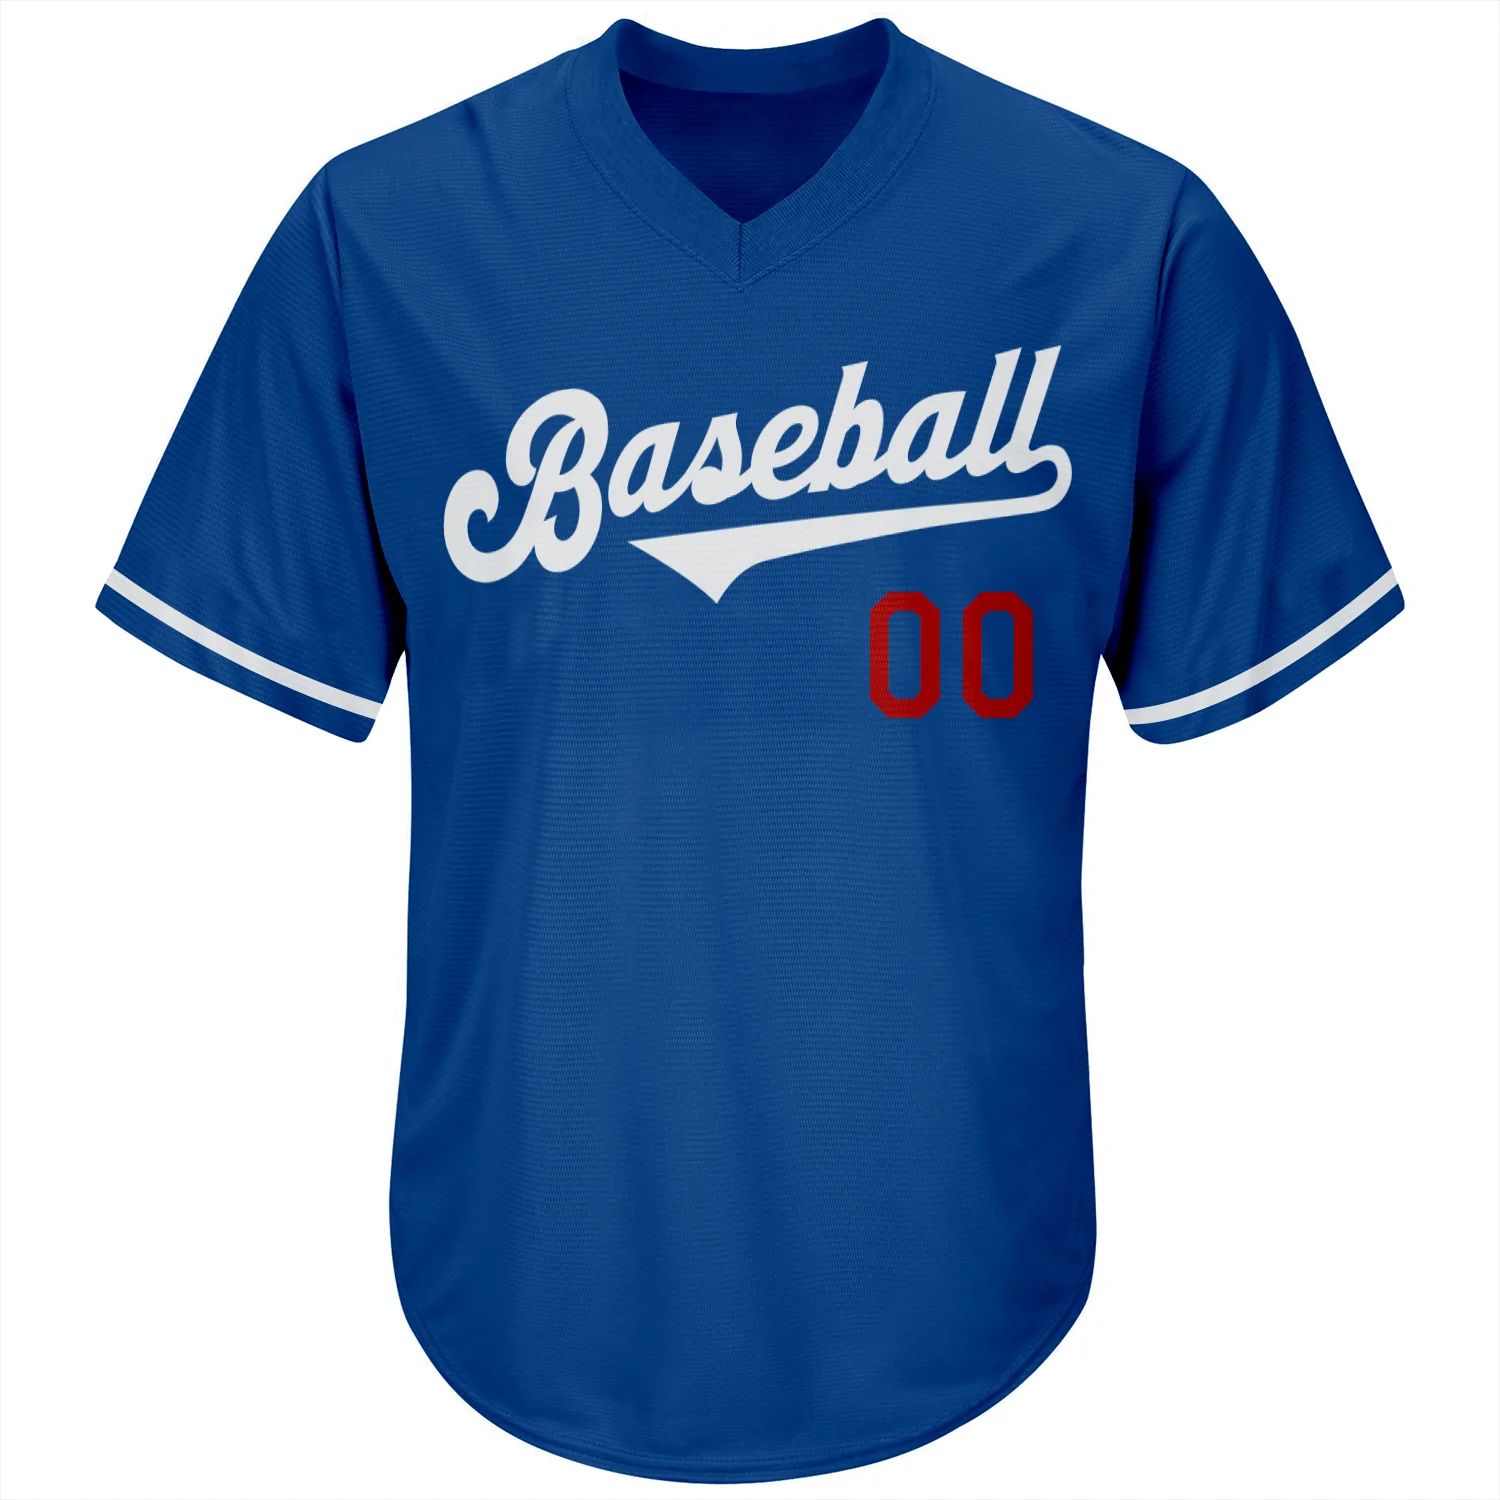 build-red-royal-baseball-white-jersey-authentic-throwback-eroyal00416-online-2.jpg